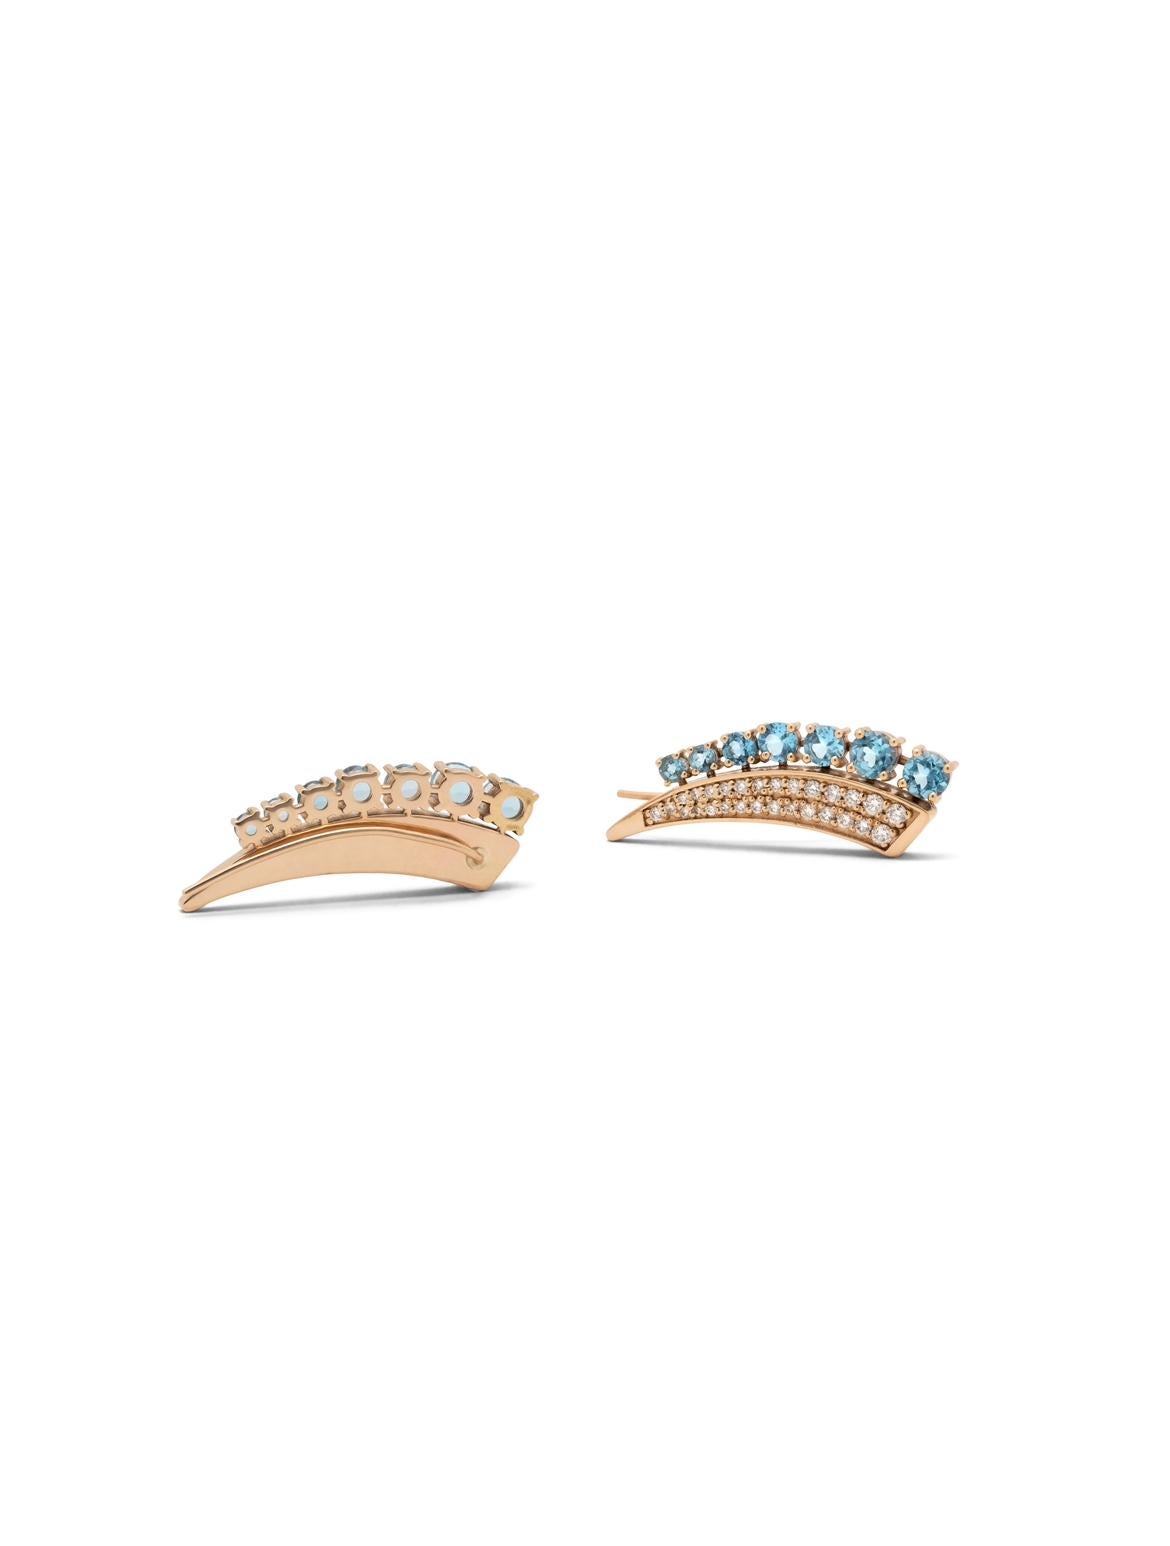 Climb right on up! Elevate your earring game with these stunning ear climbers. Adorned with diamonds and blue topaz, they are sure to make you the centre of attention. The special shape allows for the crawler to follow the curved contour of the ear